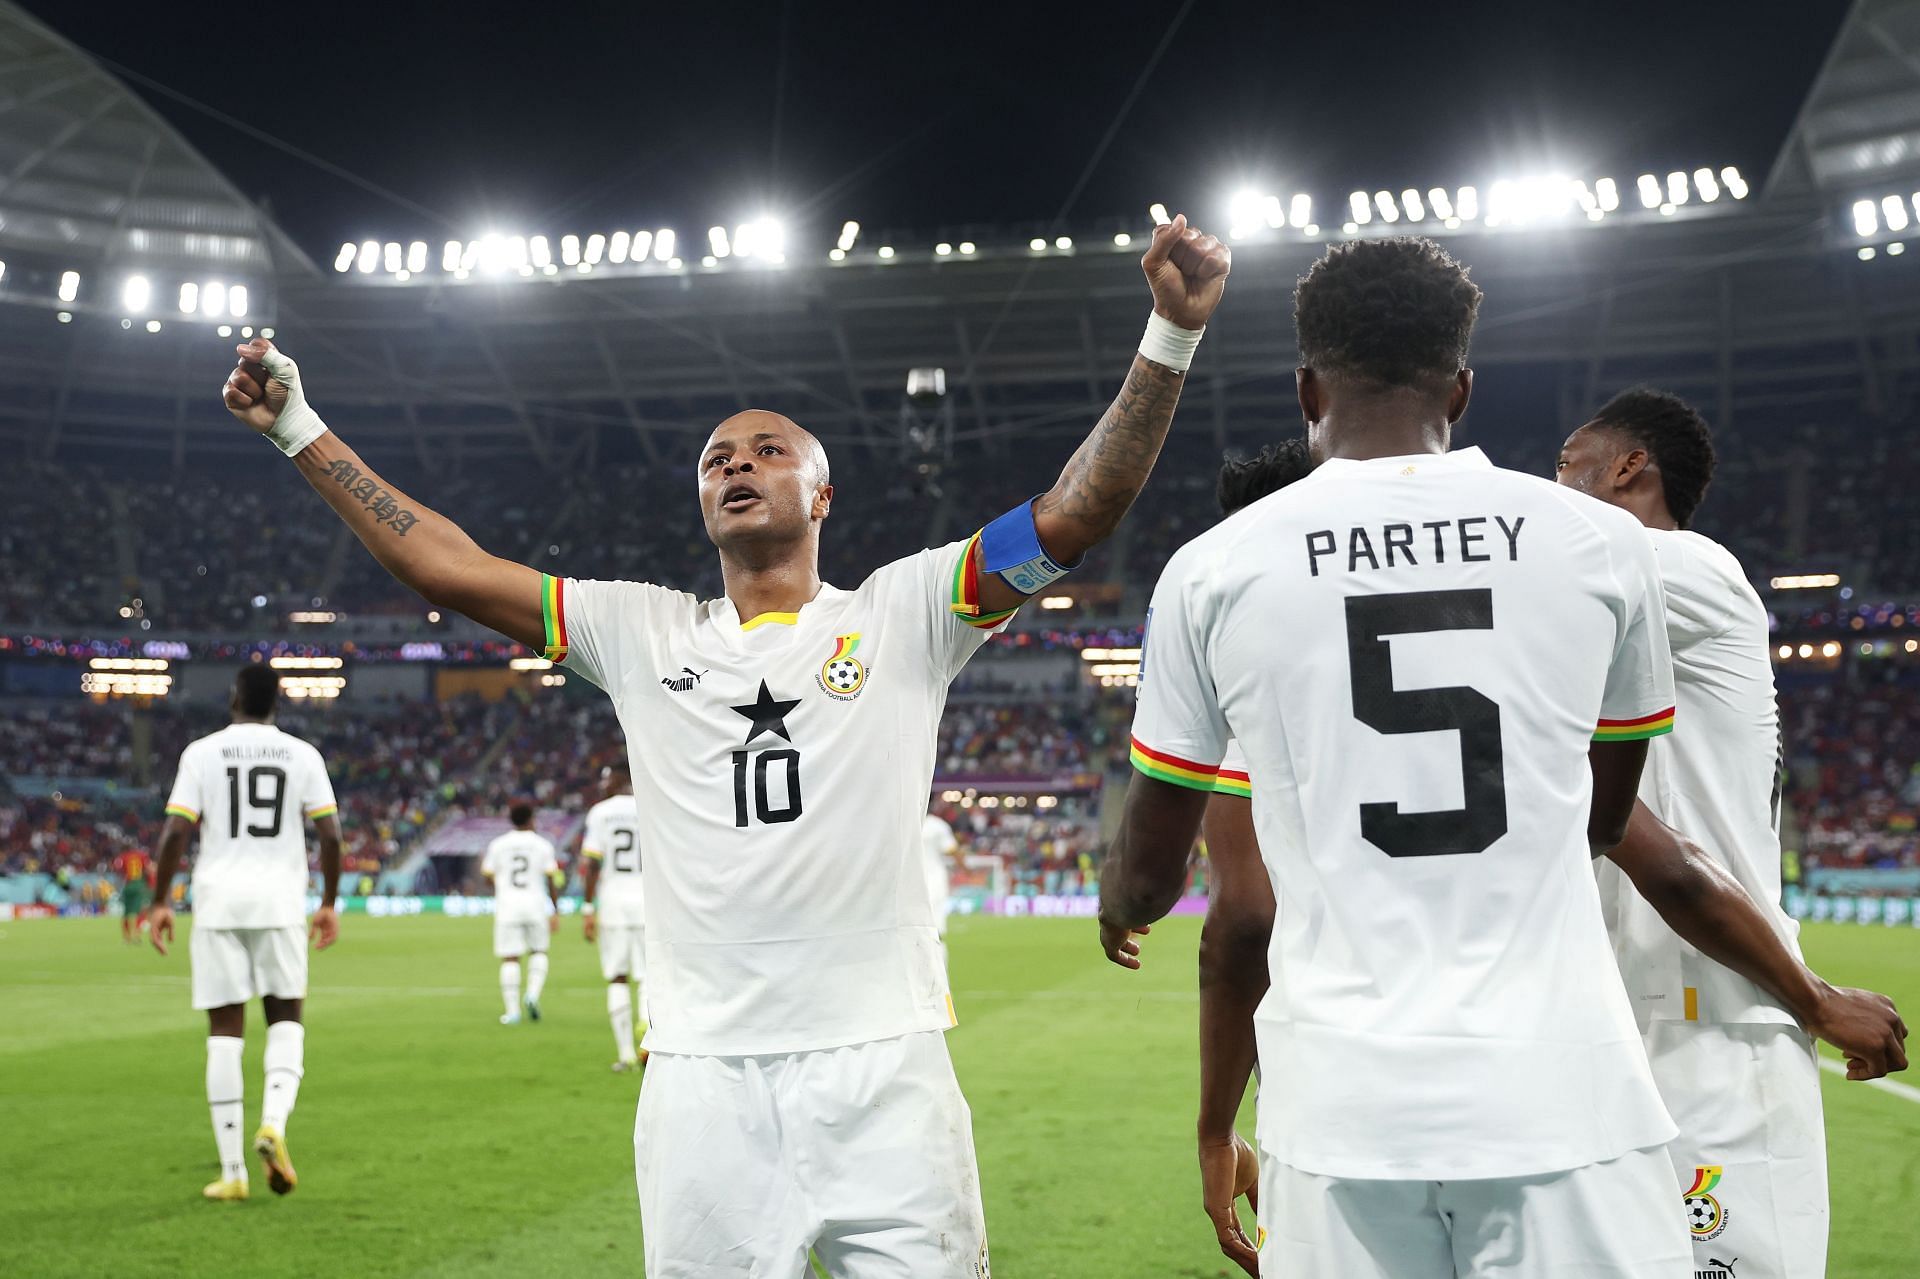 Andre Ayew celebrates after scoring against Portugal.